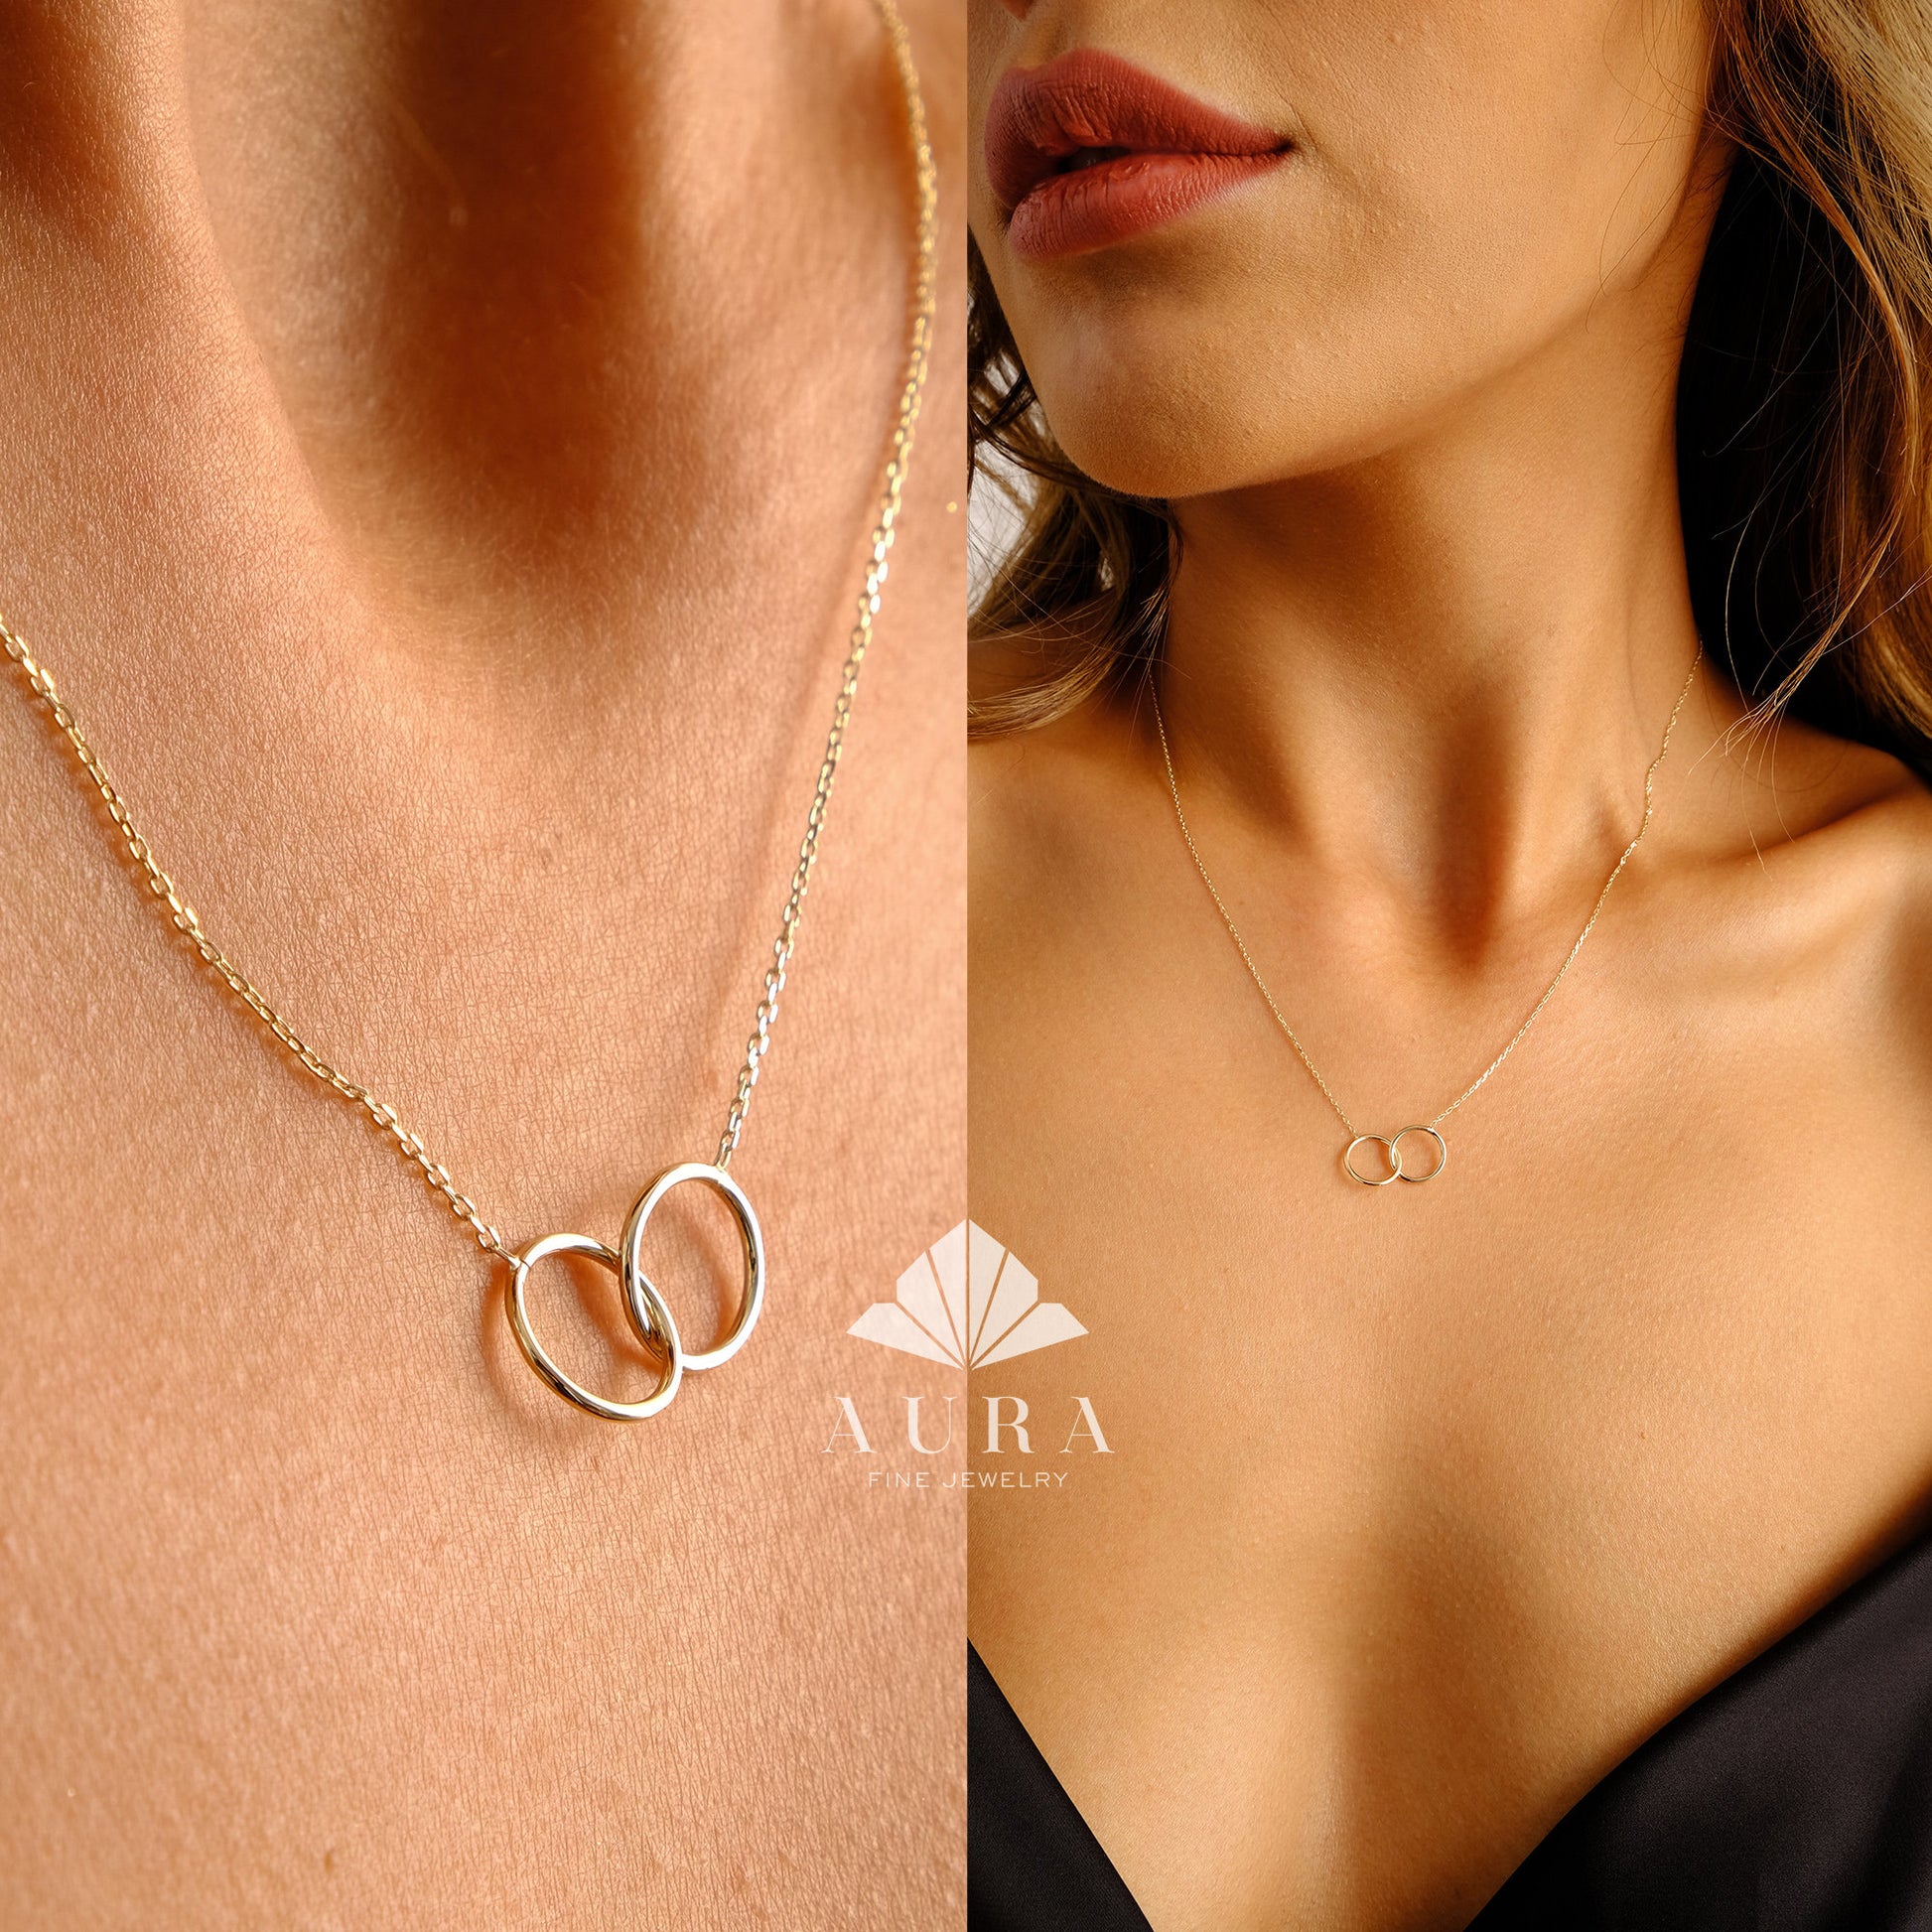 14K Gold Eternity Circle Necklace, Infinity Necklace, Unity Link Dainty Circle Interlocking Necklace, Delicate Layering Family Necklace